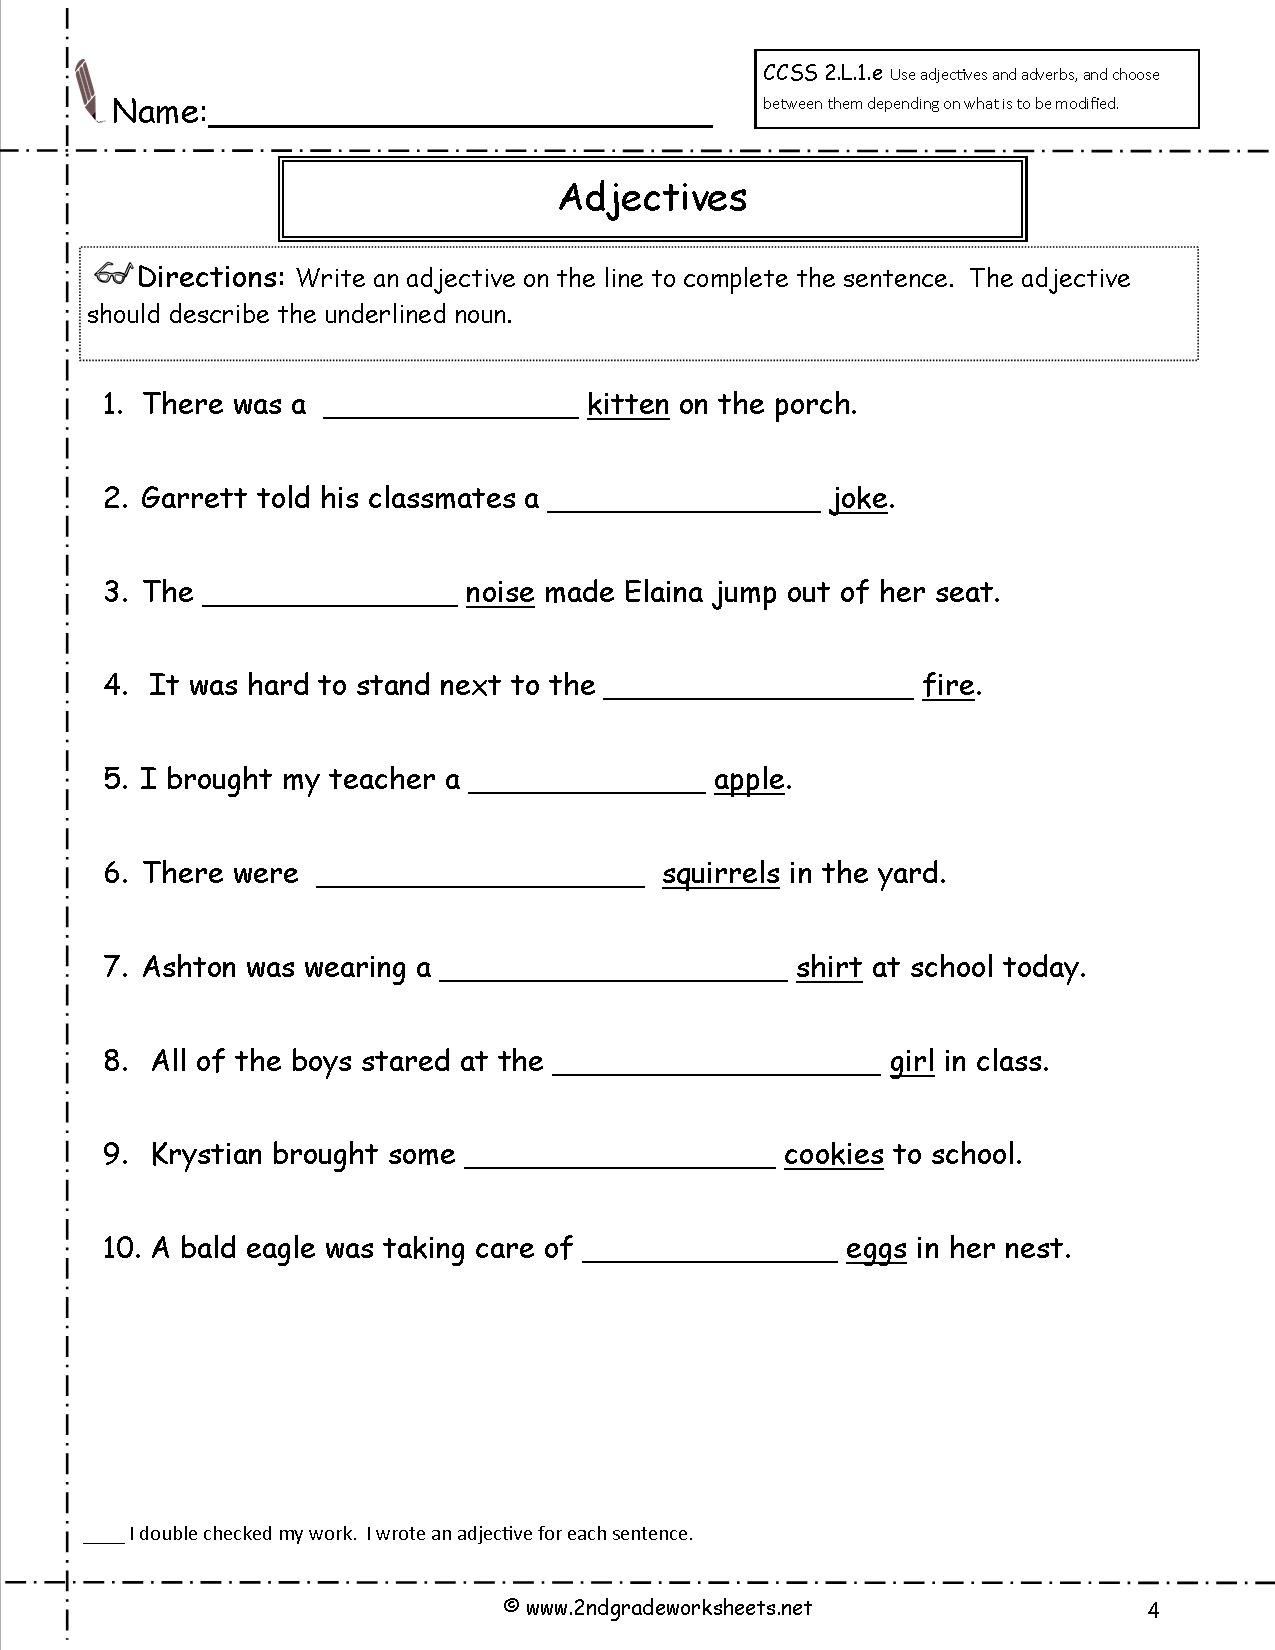 Free Adjective Worksheets For 6th Grade